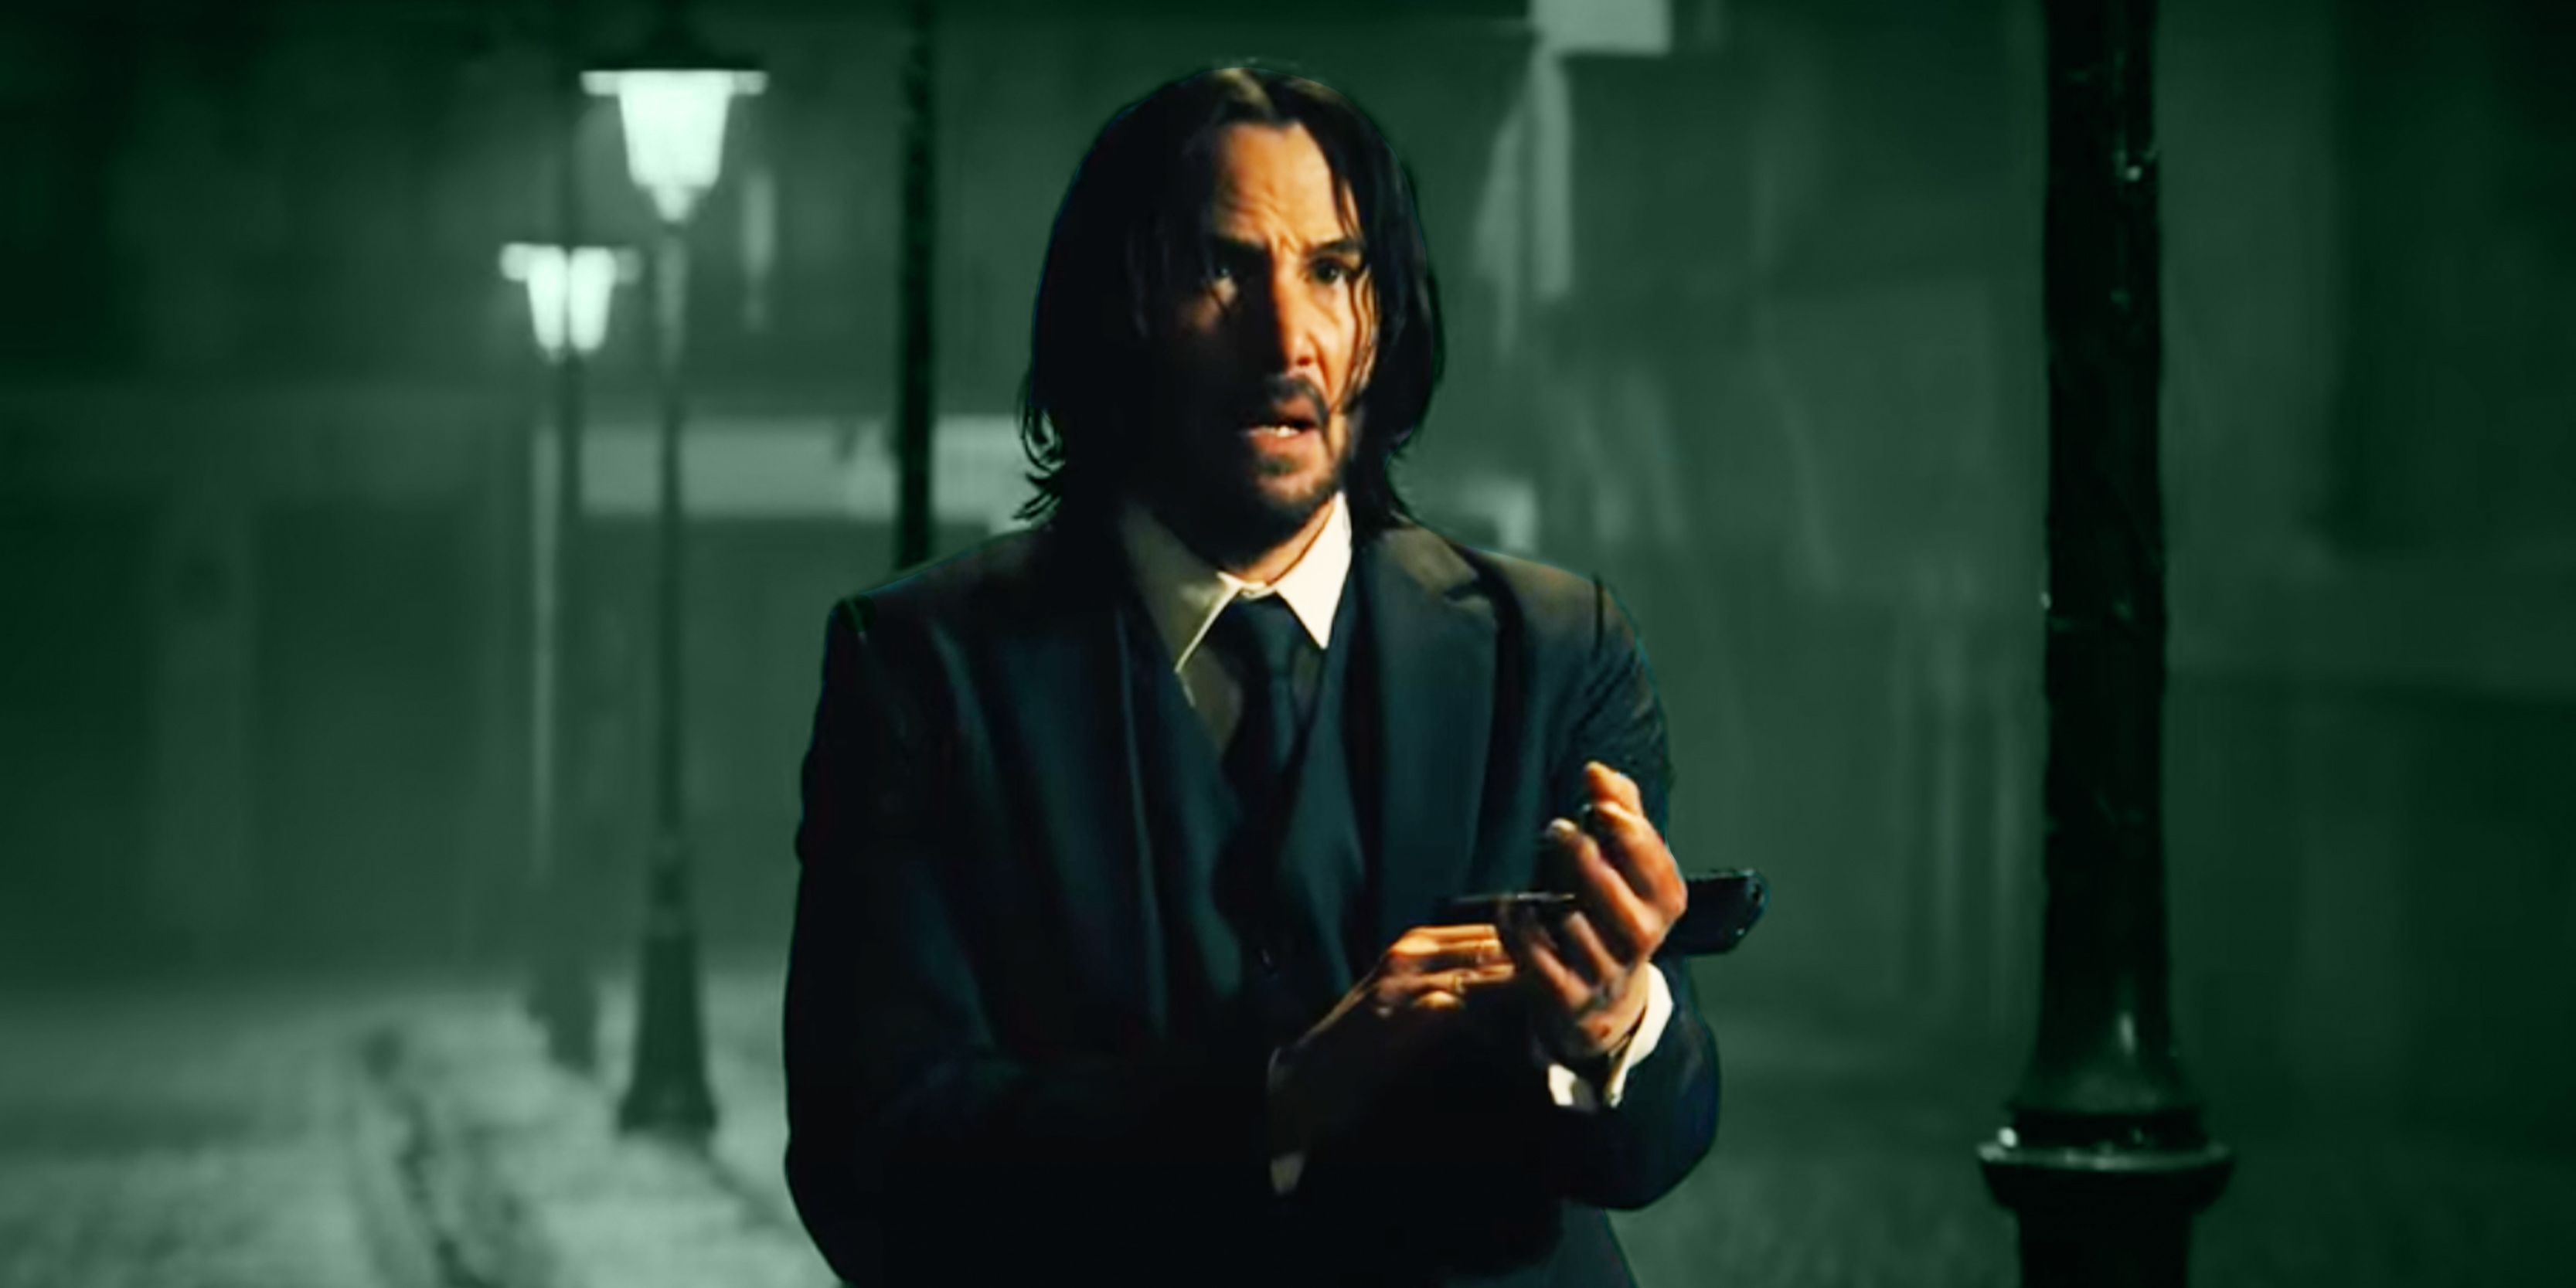 John Wick: Chapter 4' Poised For Franchise Record Opening $60M+